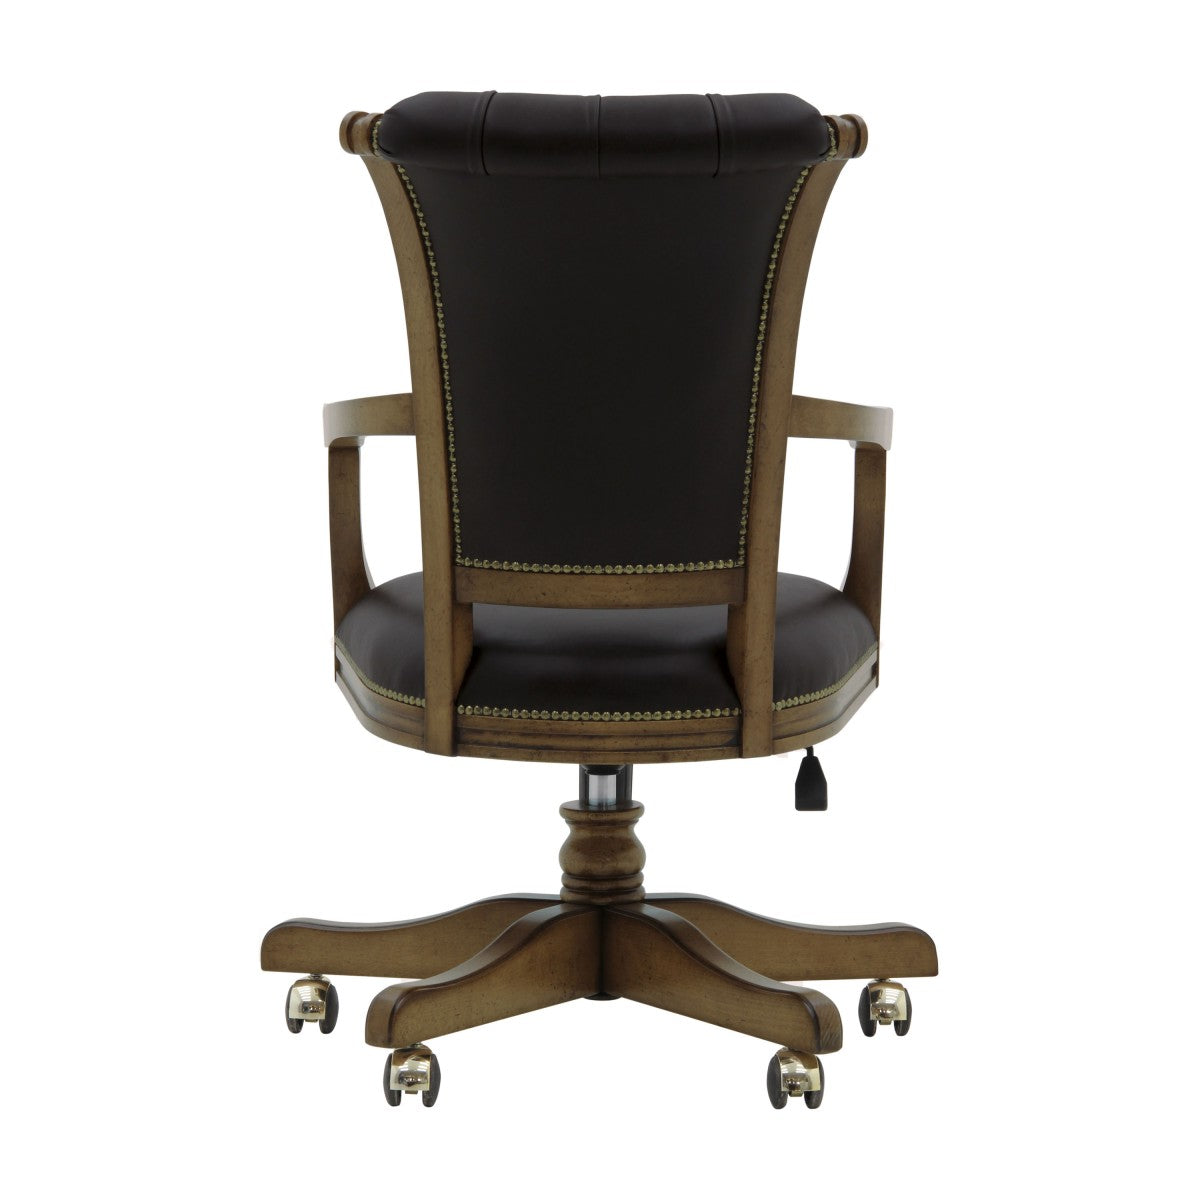 Paris Bespoke Upholstered Luxury Executive Swivel Office Desk Chair MS699A Custom Made To Order